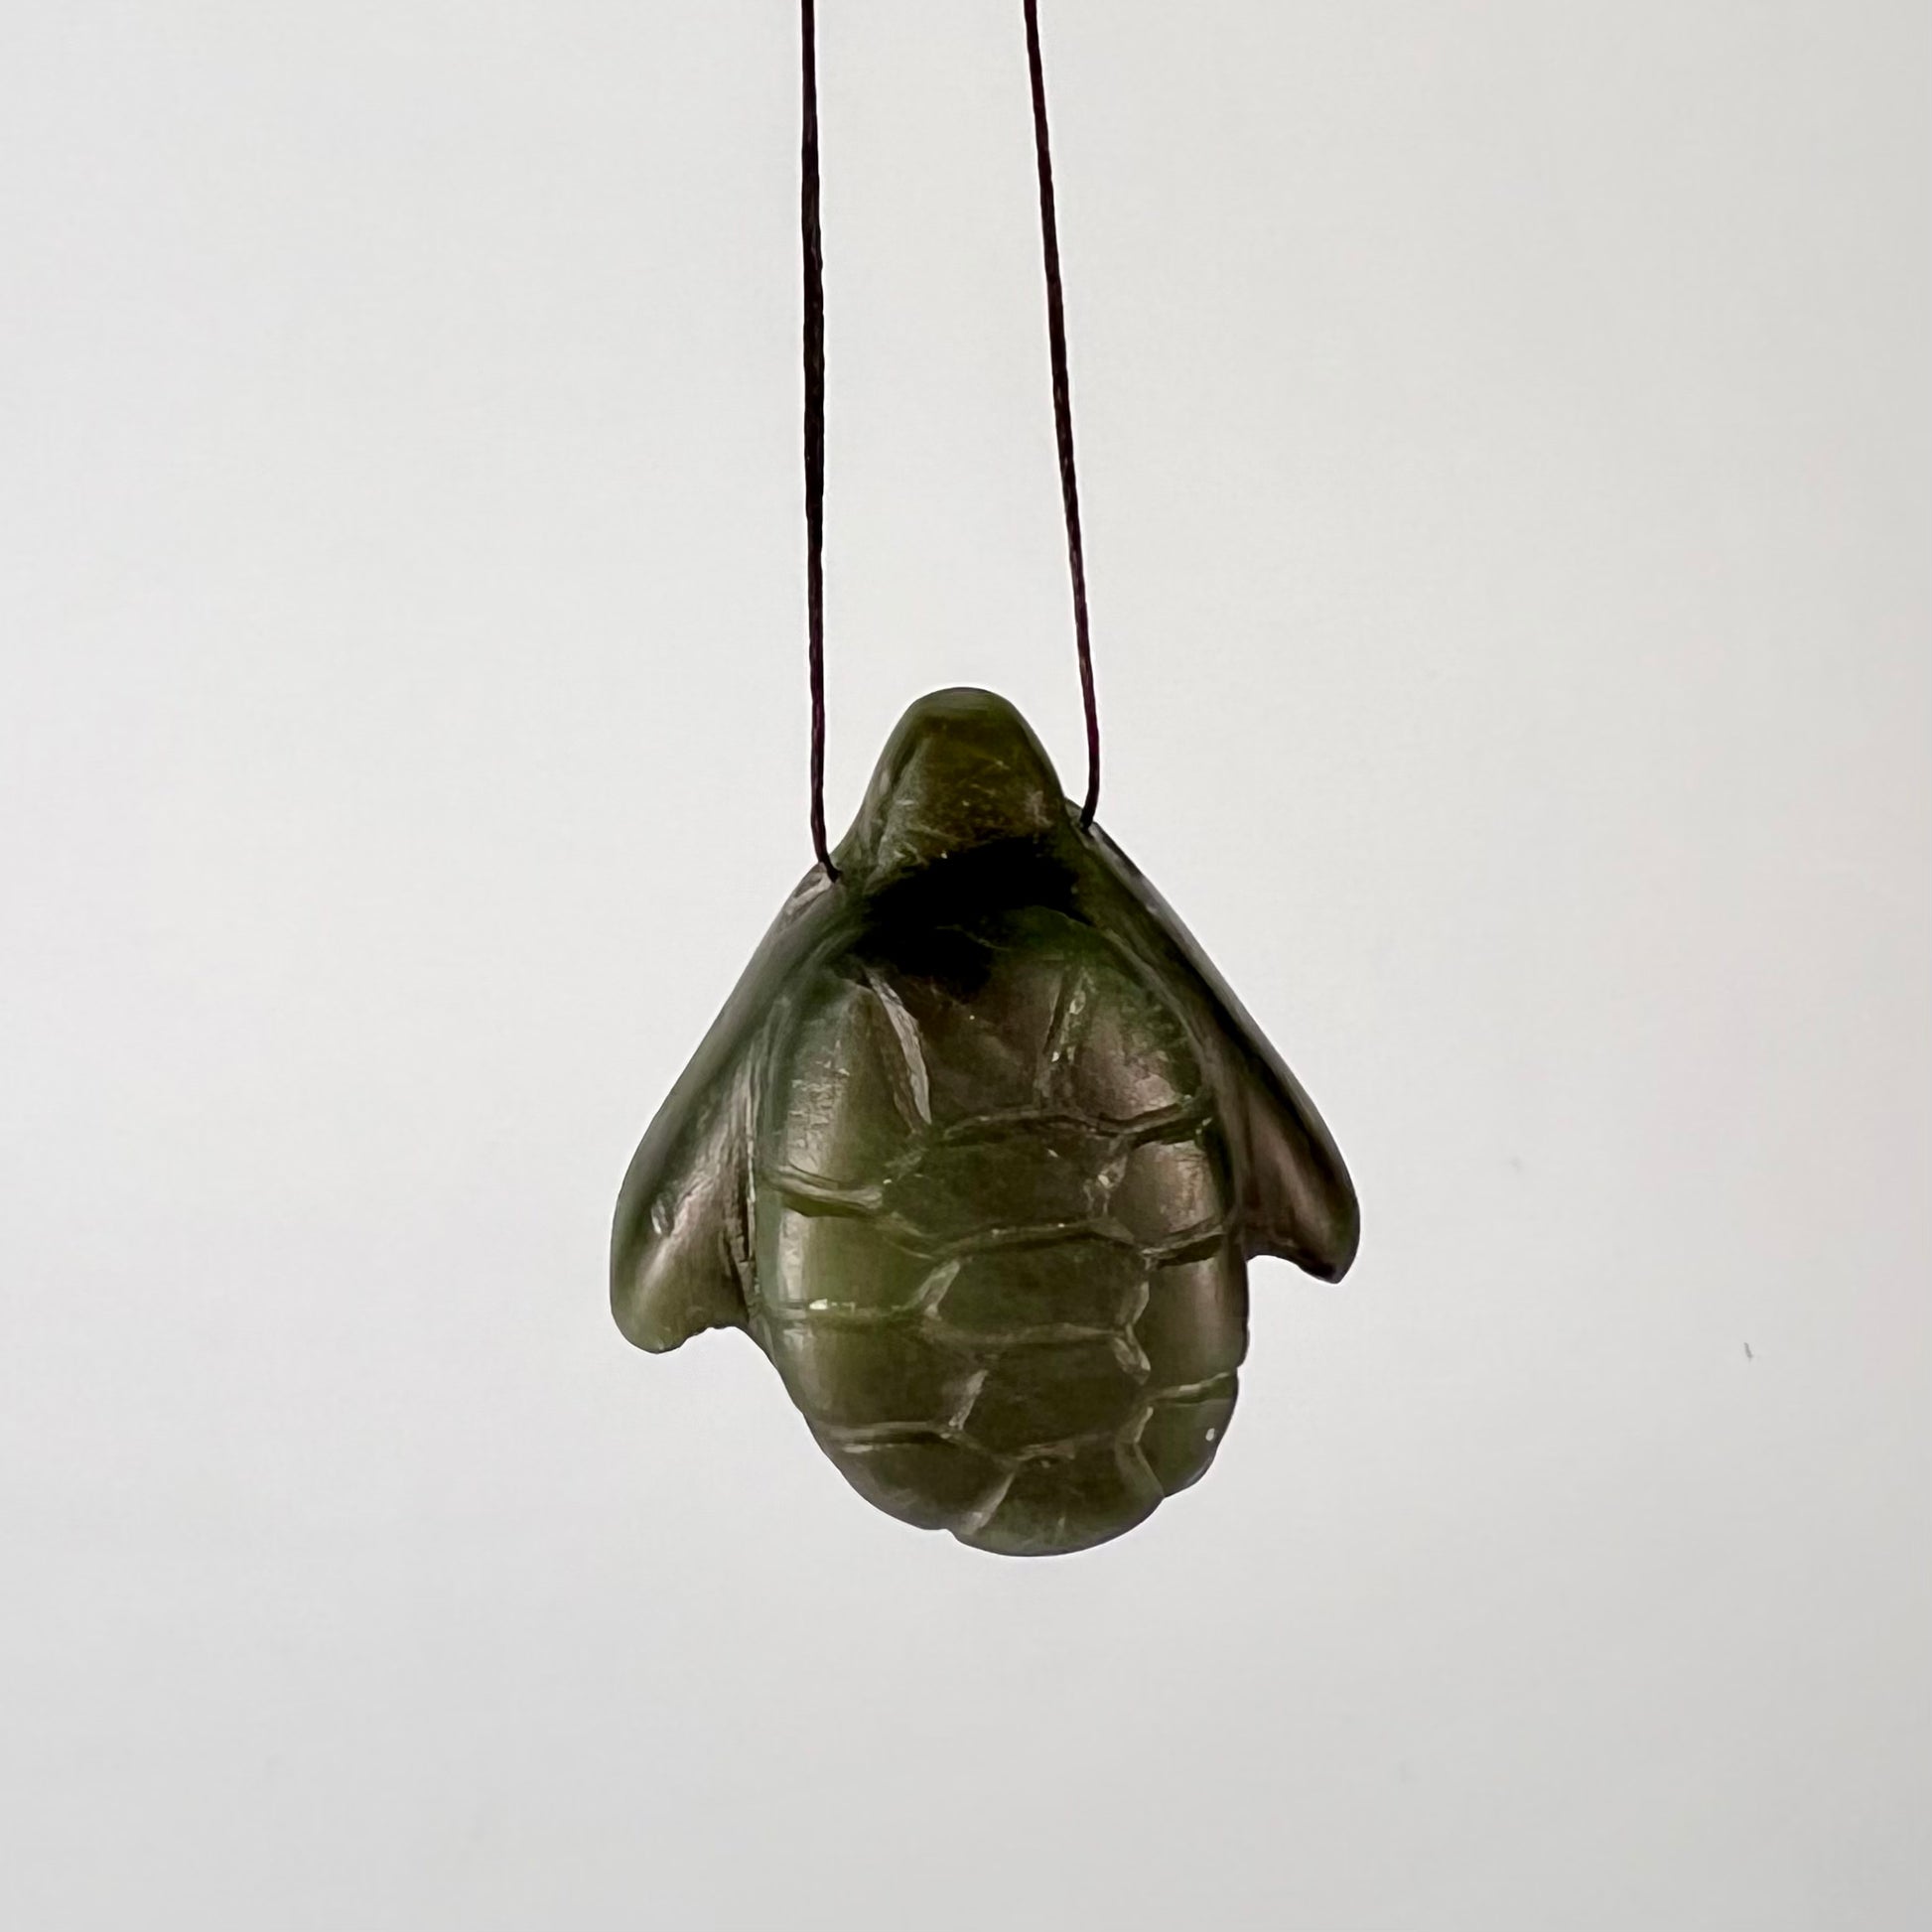 Whistler's only art class turtle pendant.